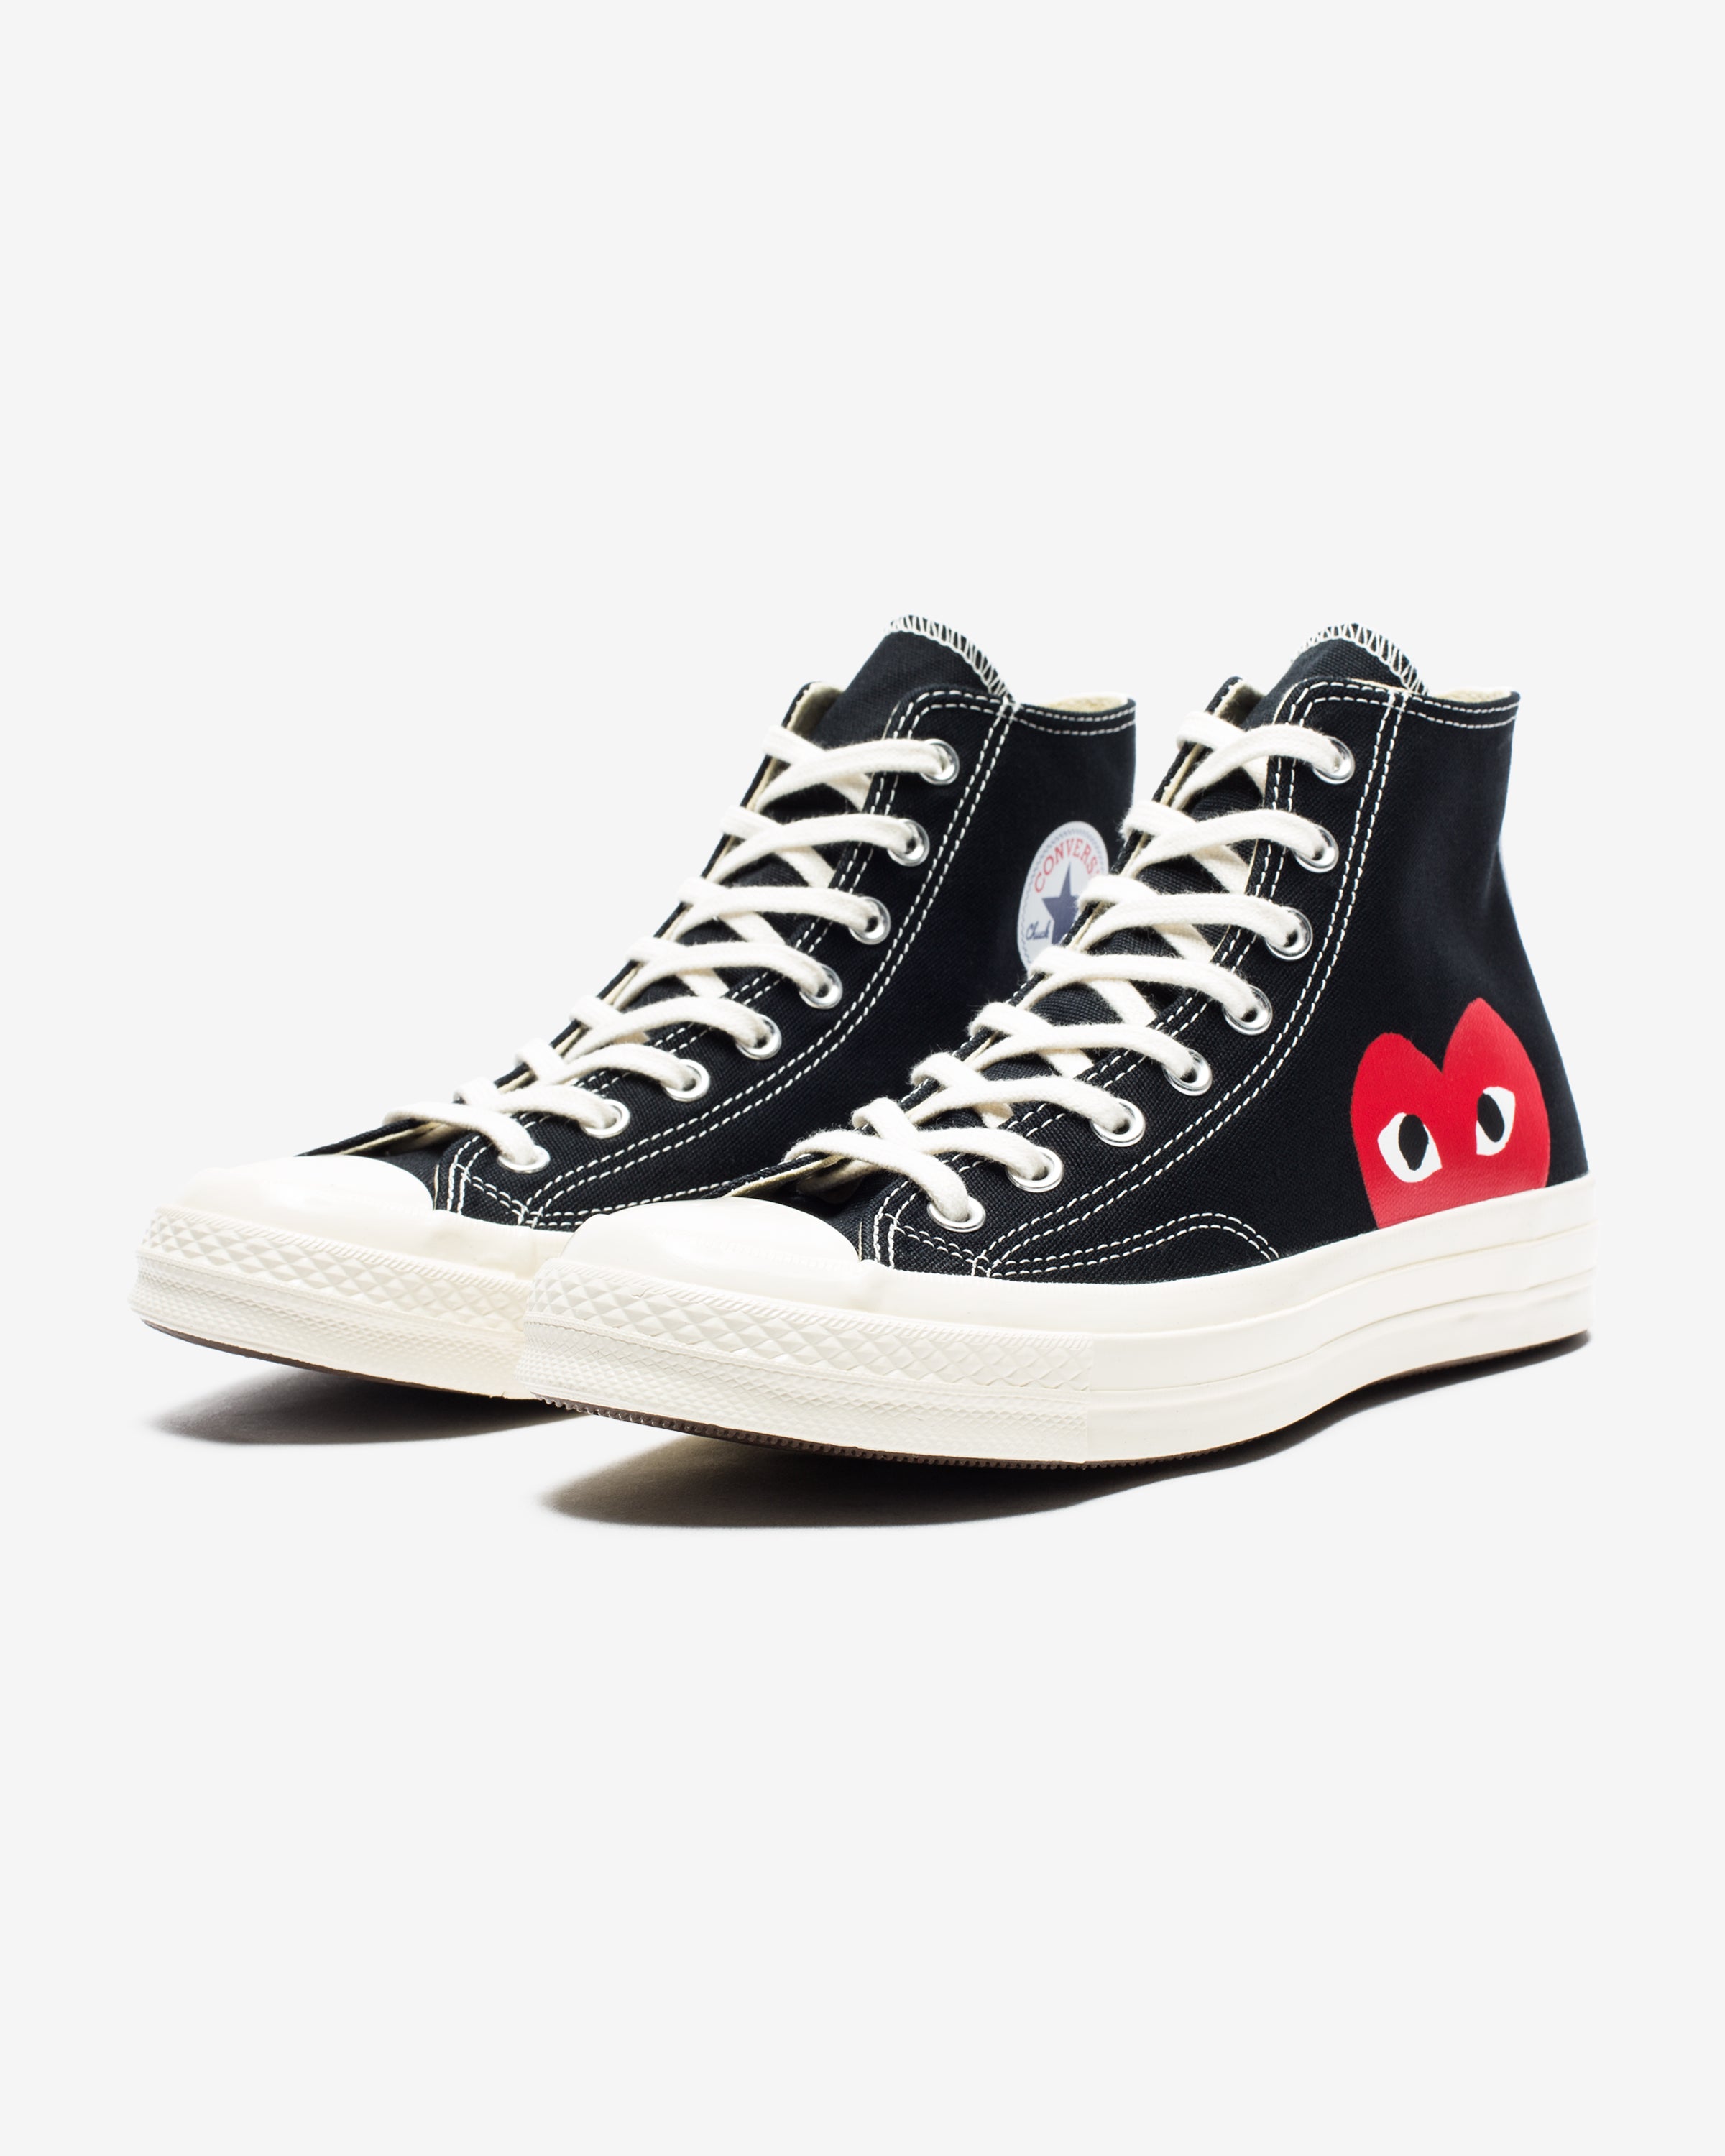 CONVERSE X CDG CHUCK TAYLOR ALL STAR '70 HIGH – Undefeated